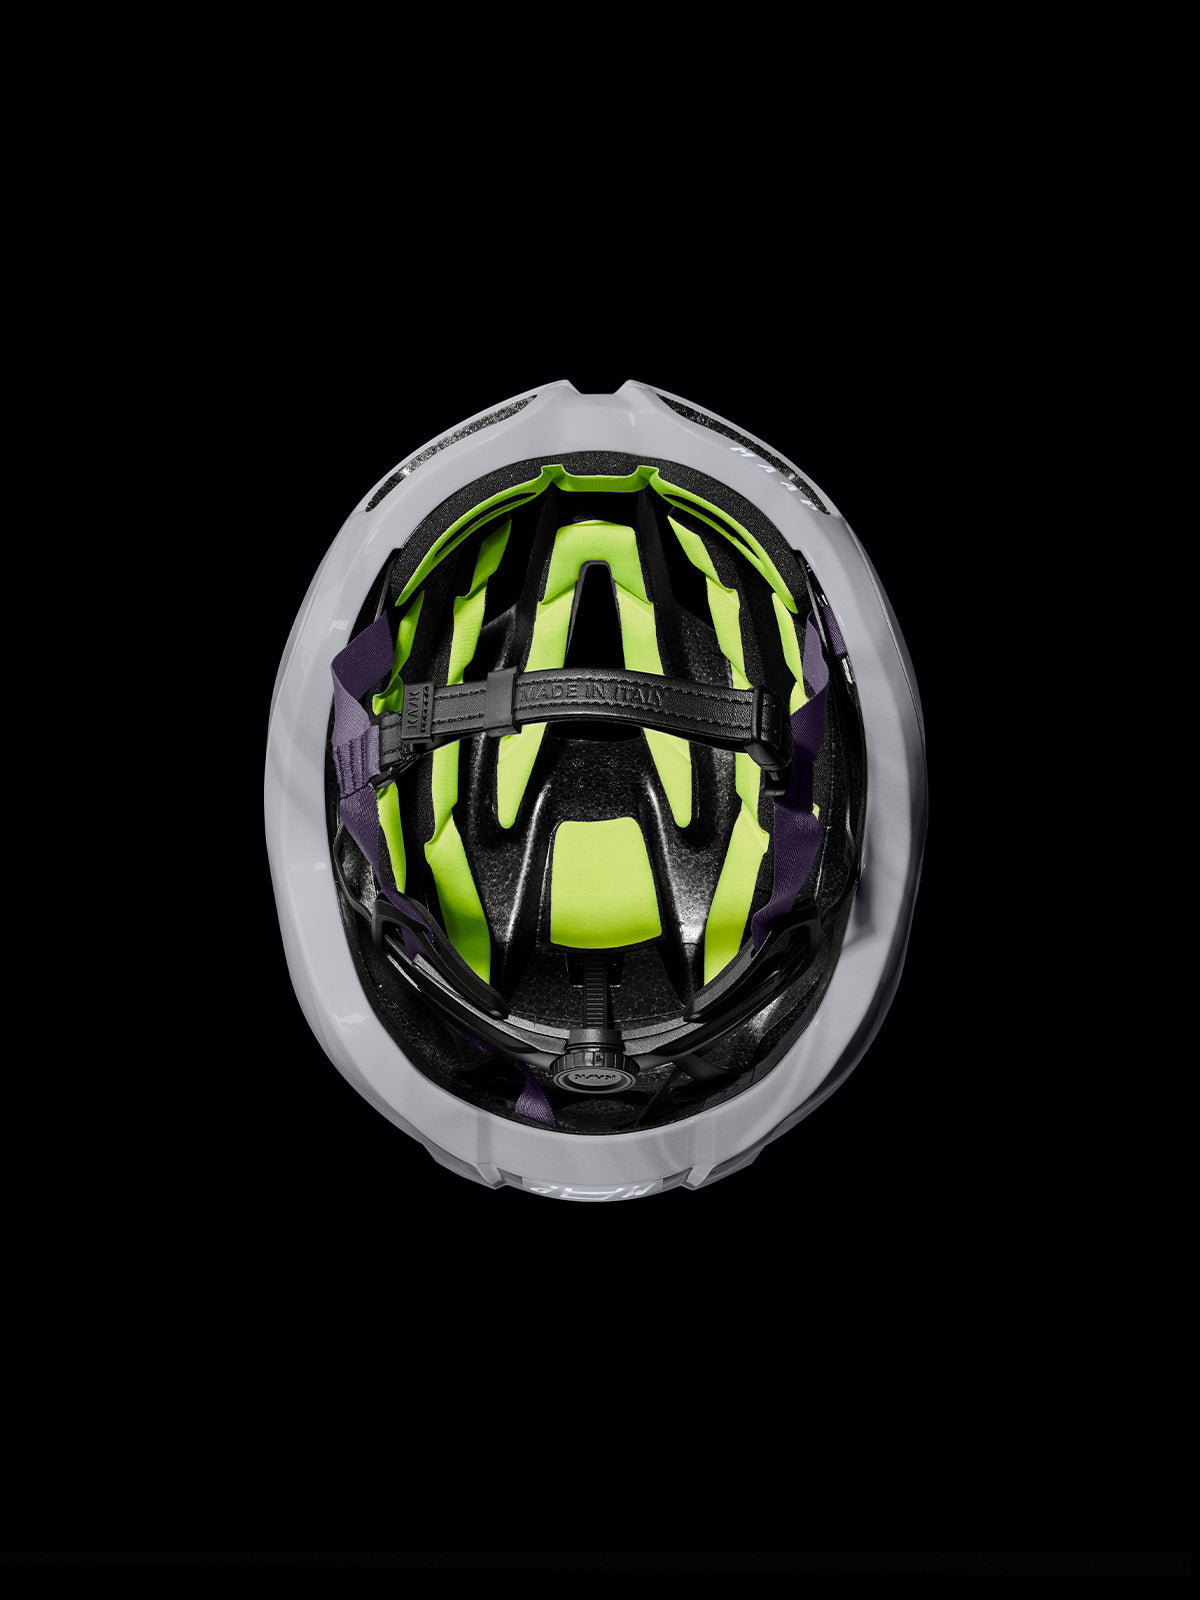 MAAP x KASK Protone Icon CPSC